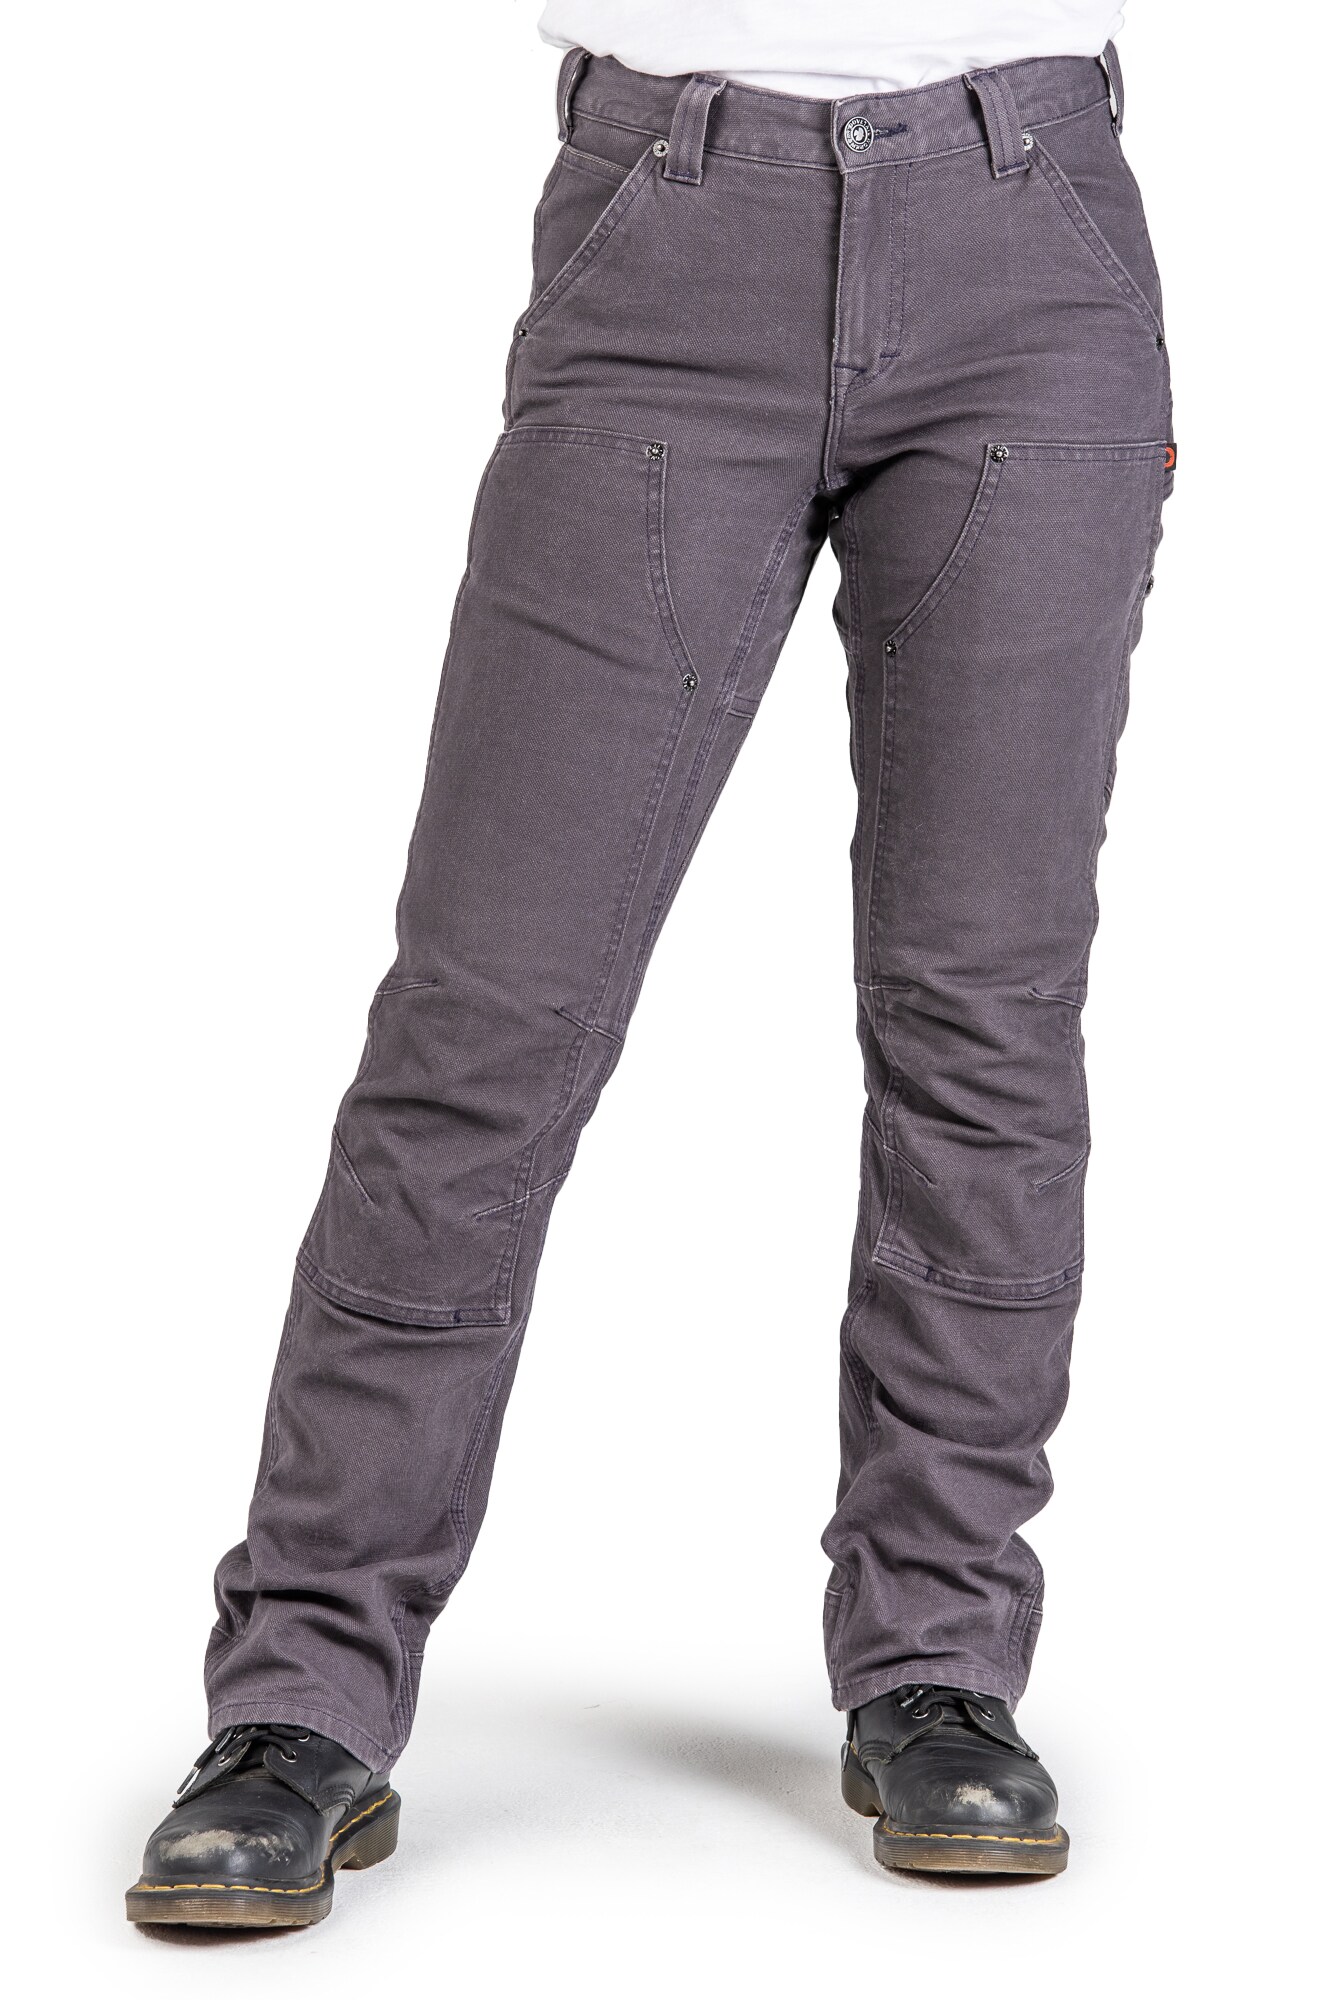 Dovetail Workwear Women's Grey Canvas Work Pants (12 X 30) in the